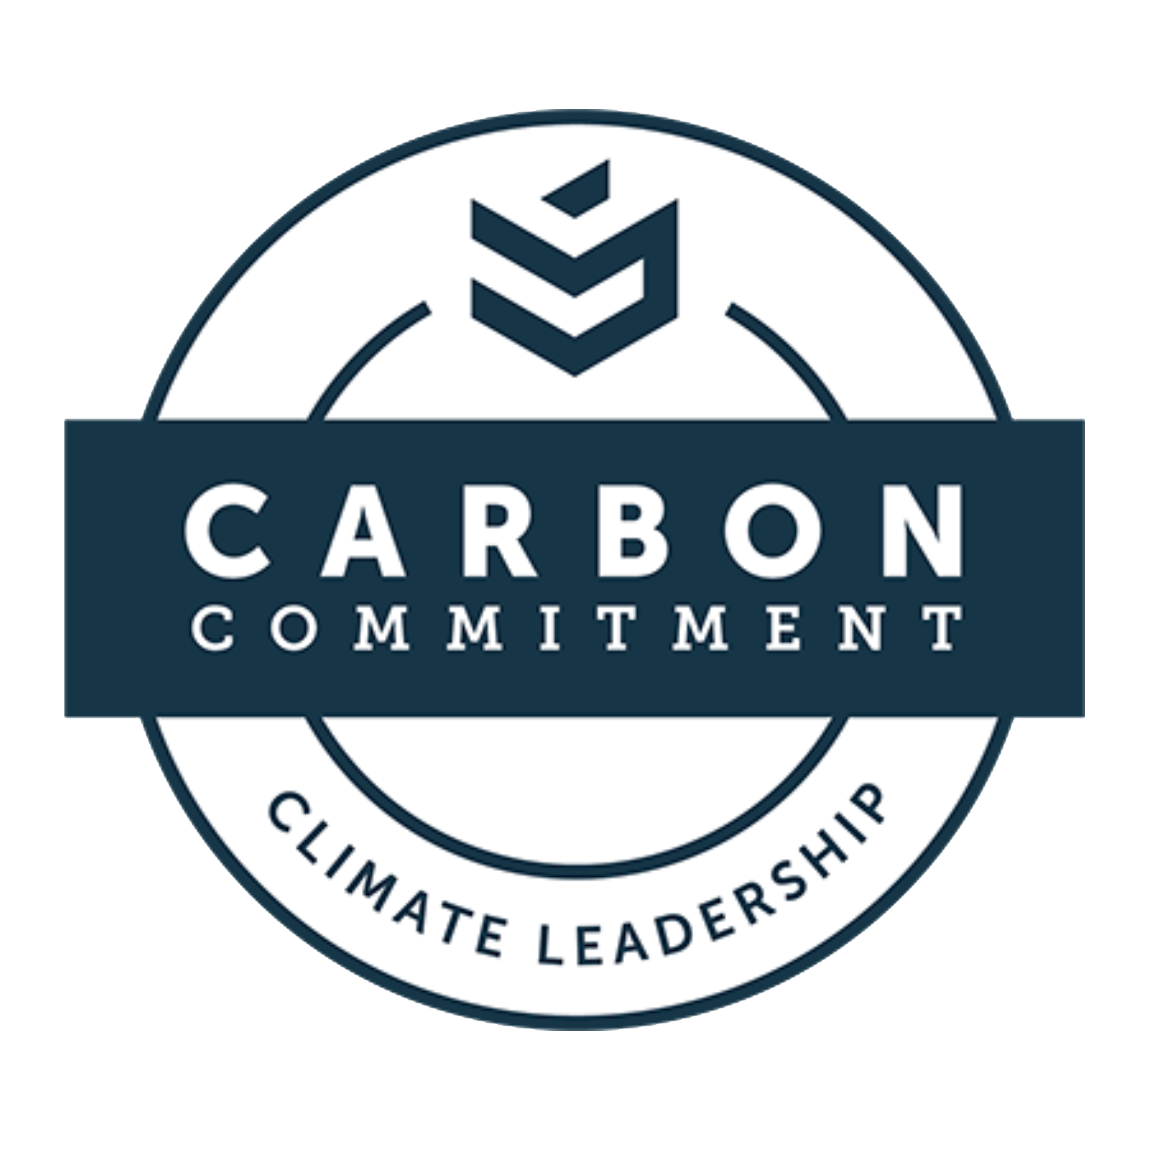 Carbon Committment in Climate Leadership